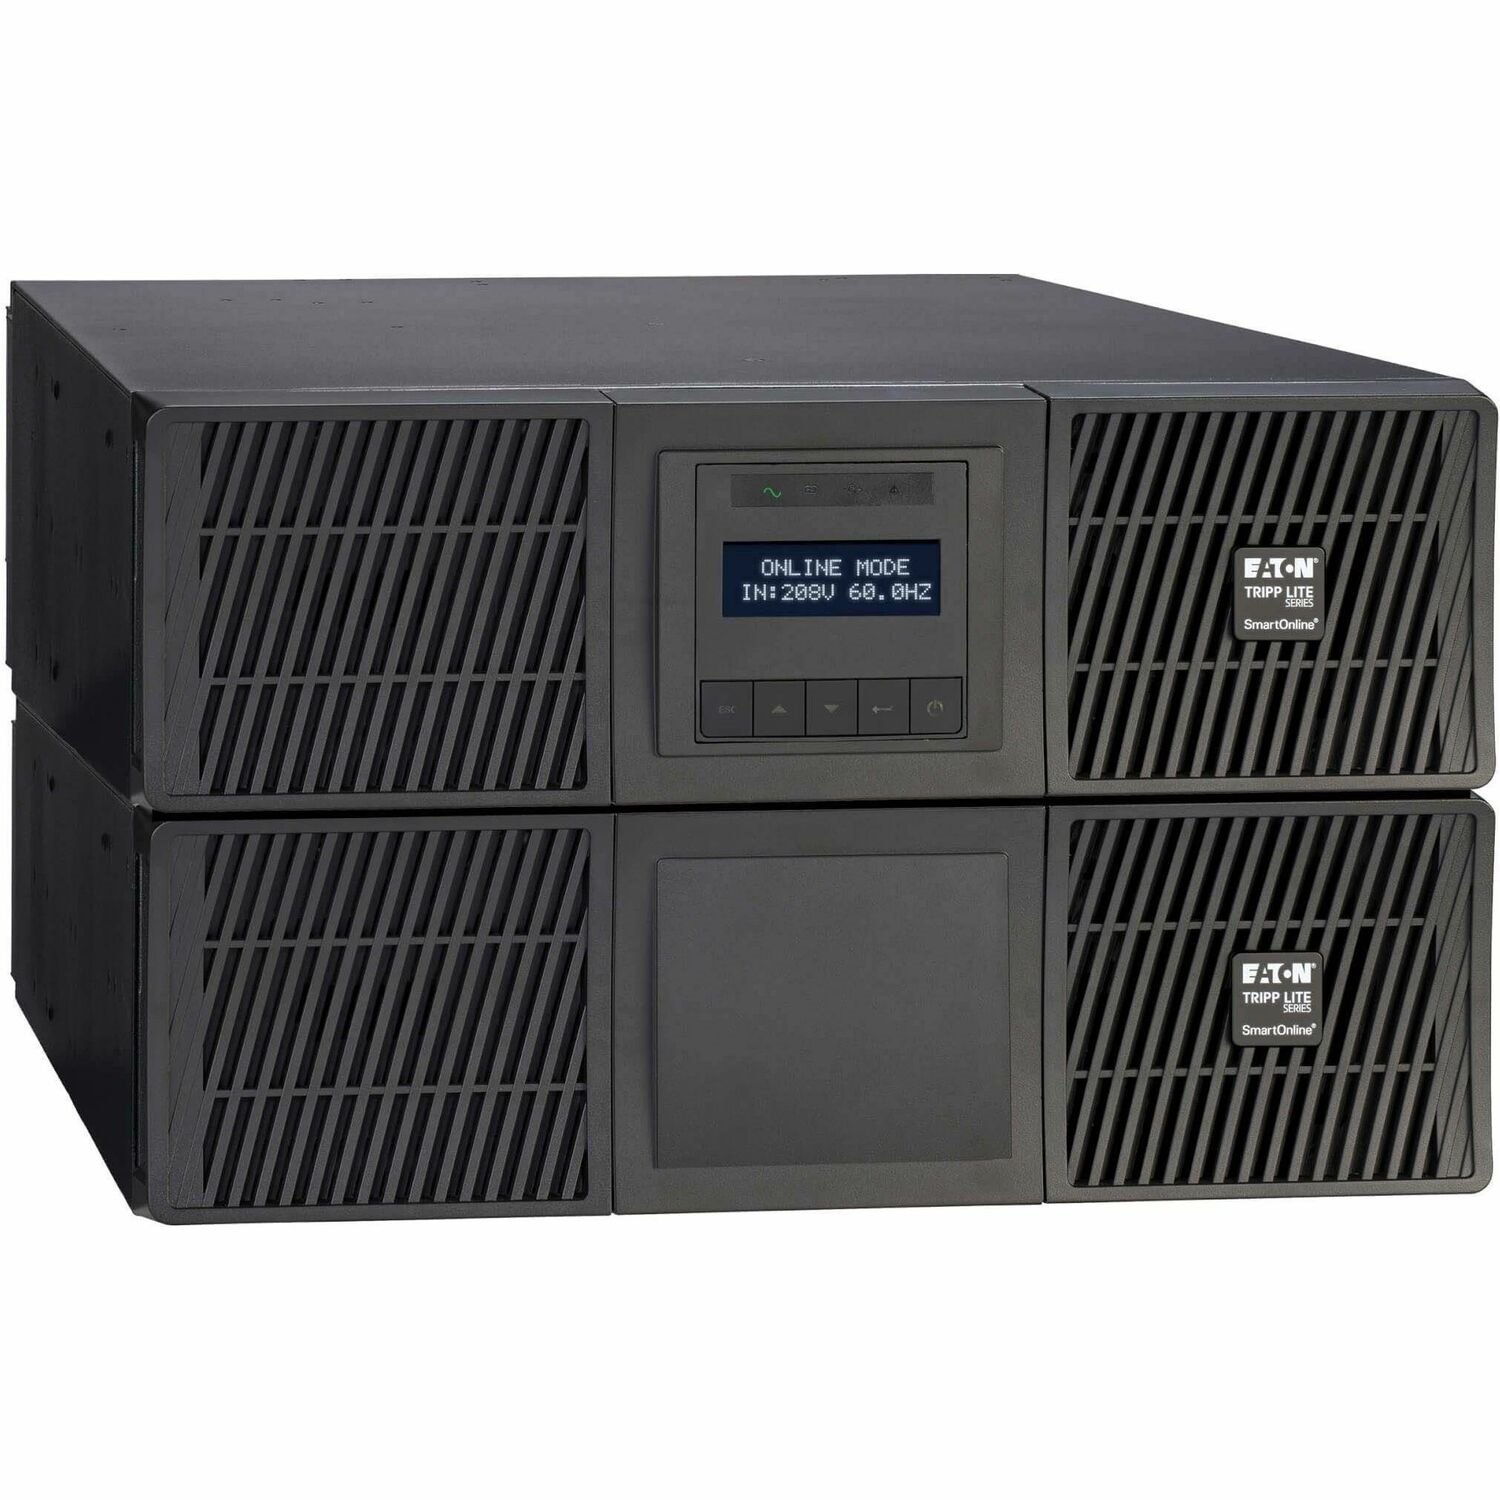 Eaton Tripp Lite Series SmartOnline 6000VA 5400W 120/208V Online Double-Conversion UPS with Stepdown Transformer - 18 5-20R, 2 L6-20R and 1 L6-30R Outlets, L6-30P Input, Network Card Included, Extended Run, 6U - Battery Backup